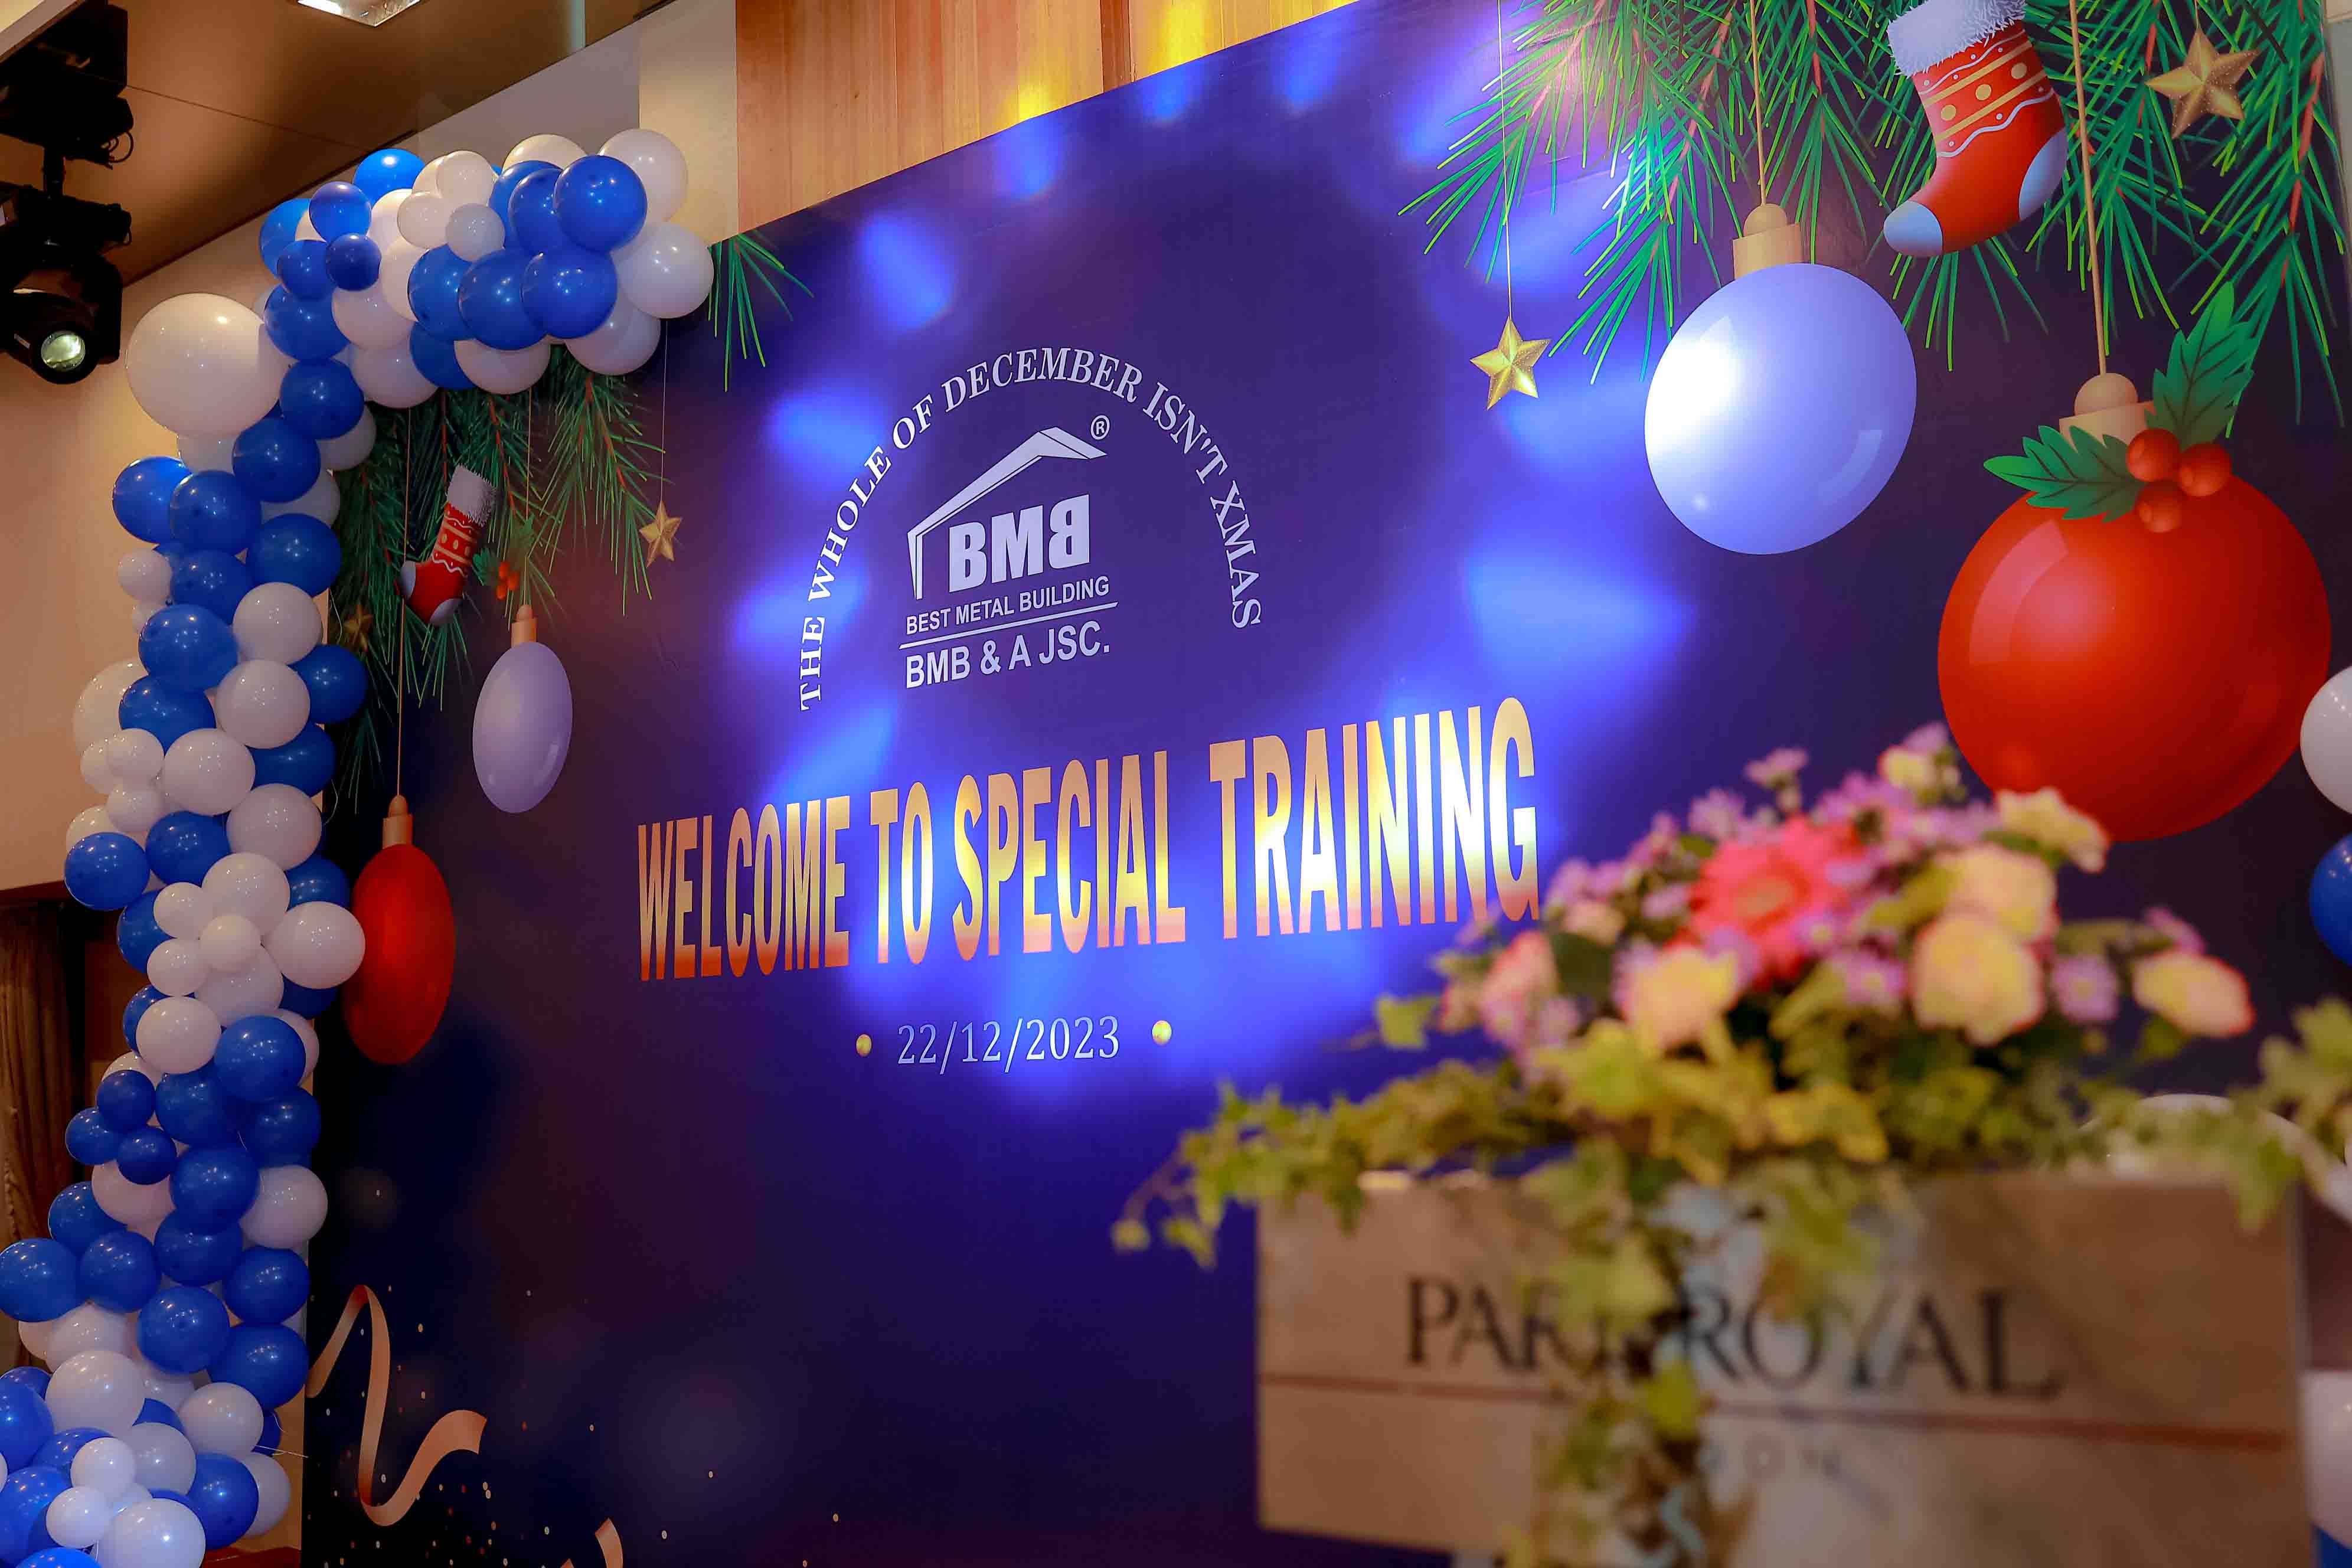 BMB STEEL celebrated Christmas and participated in internal training